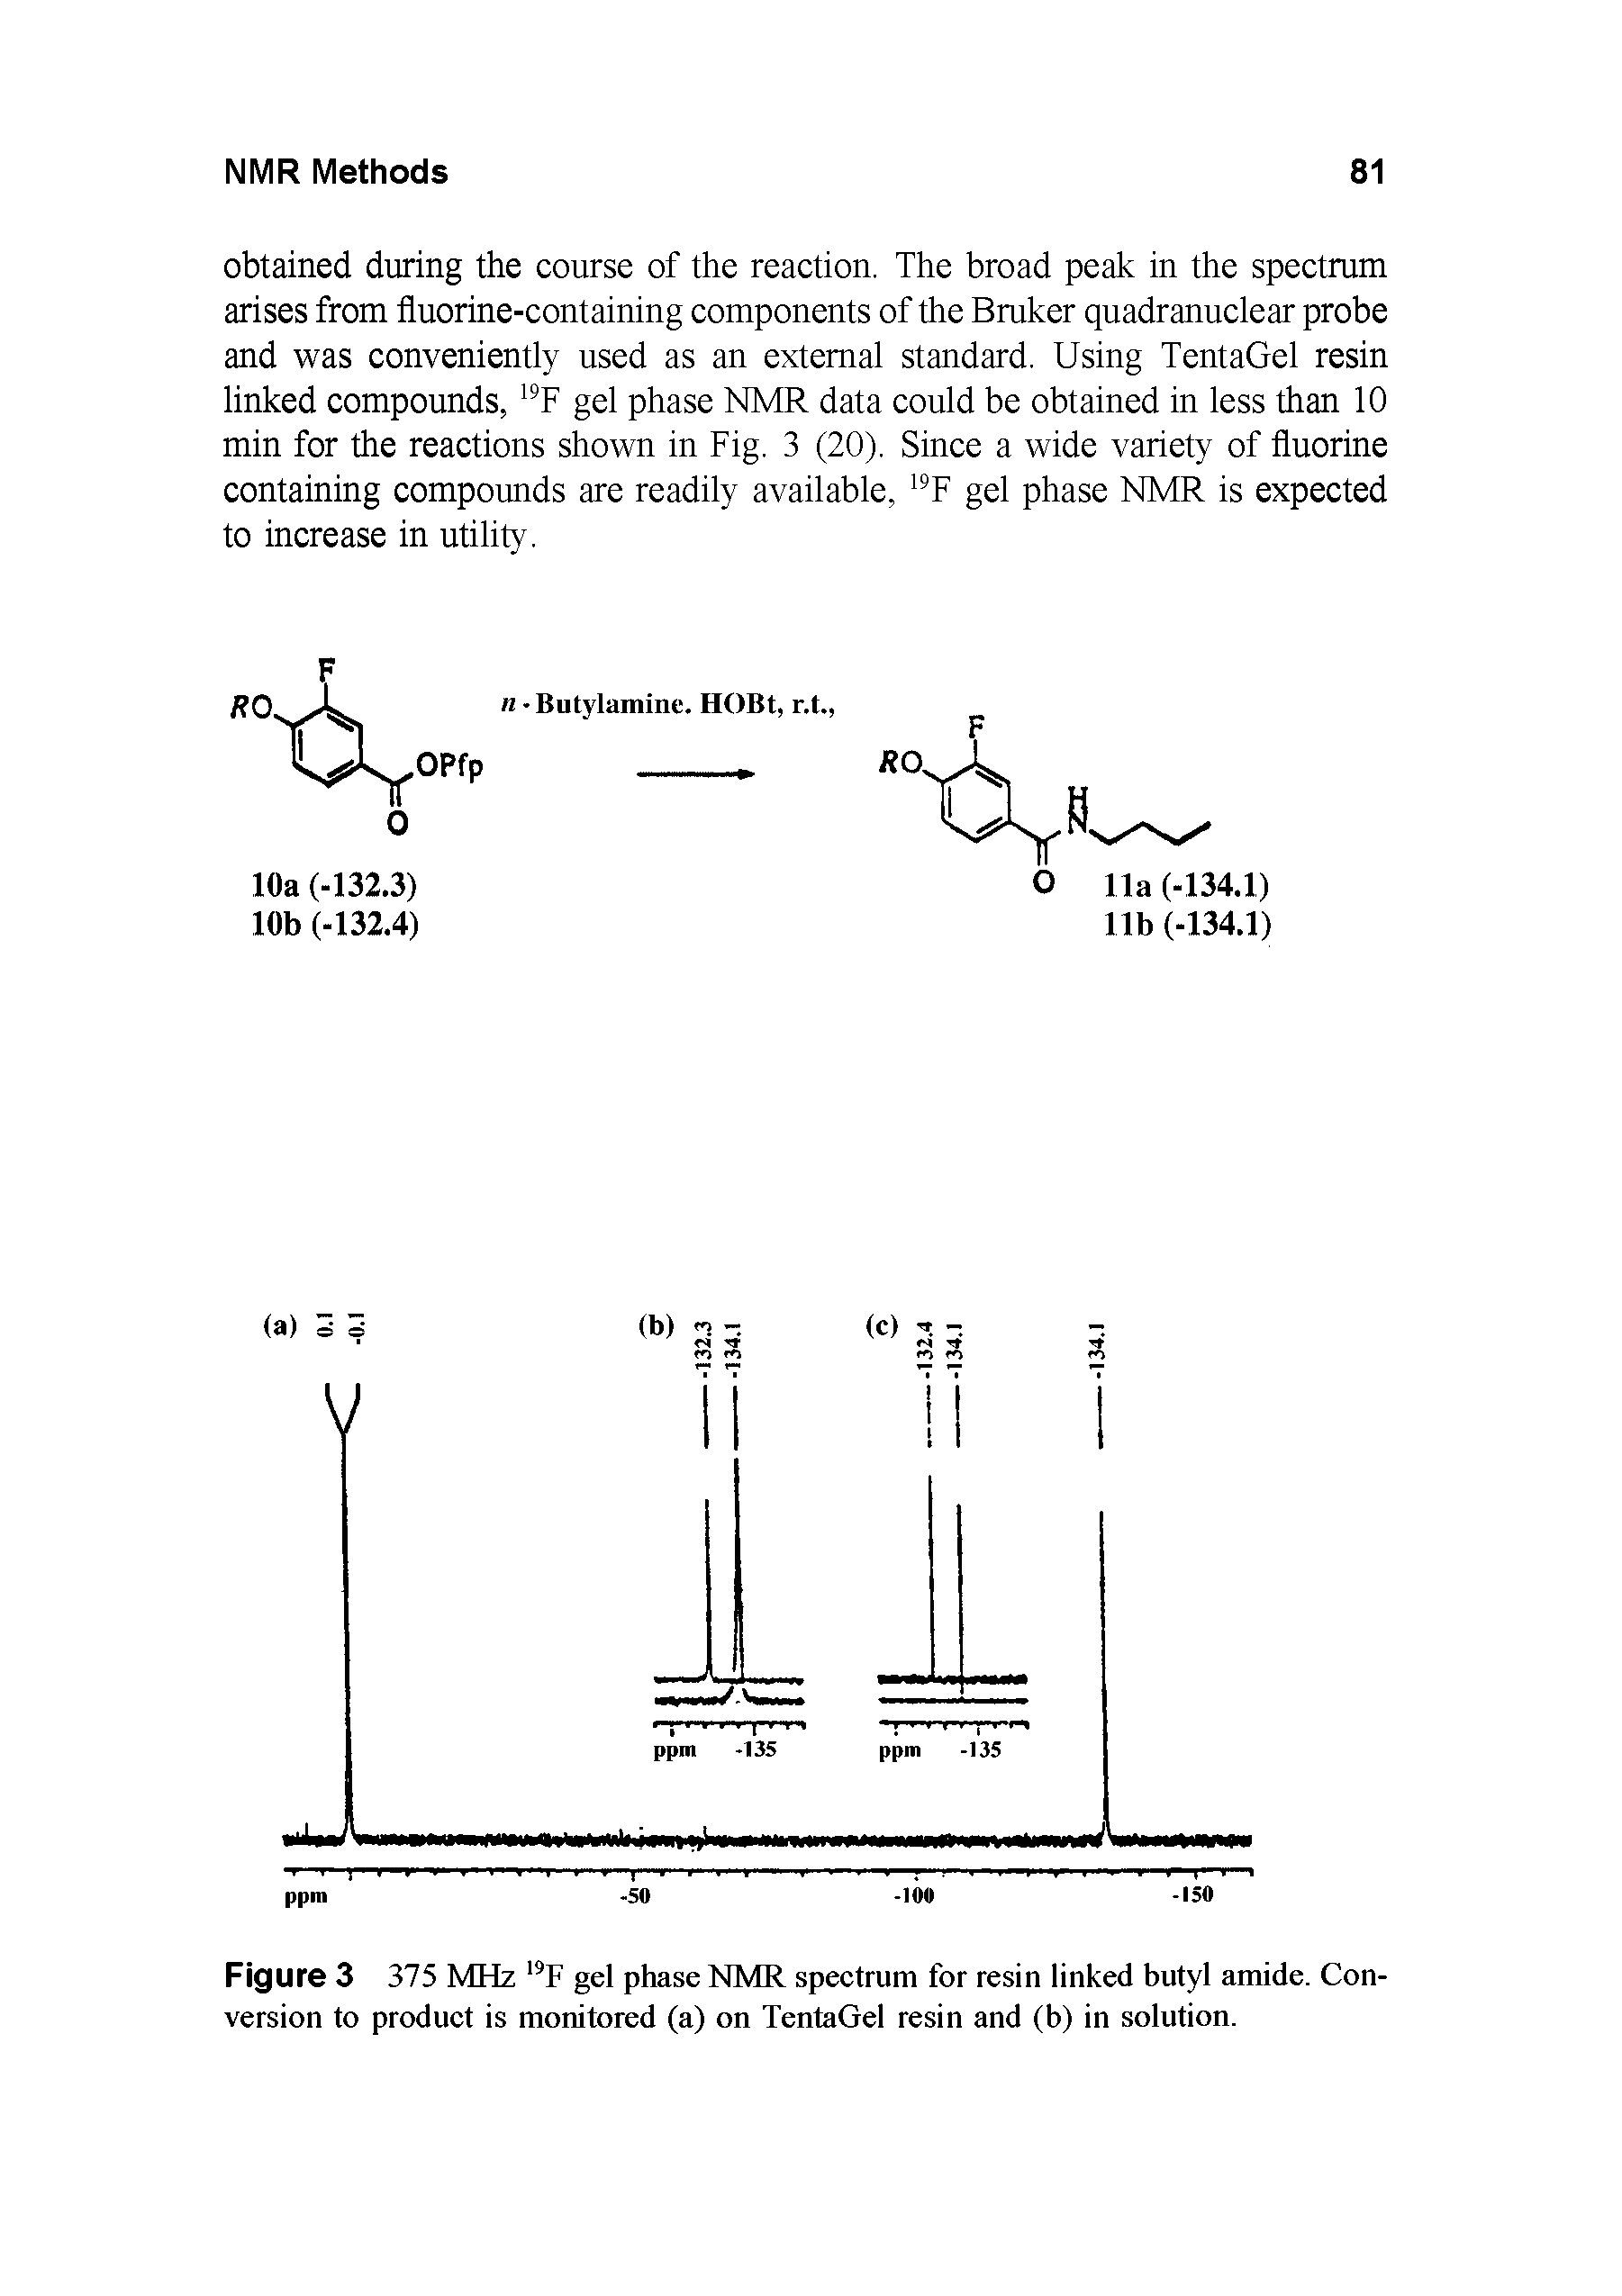 Figure 3 375 MHz 19F gel phase NMR spectrum for resin linked butyl amide. Conversion to product is monitored (a) on TentaGel resin and (b) in solution.